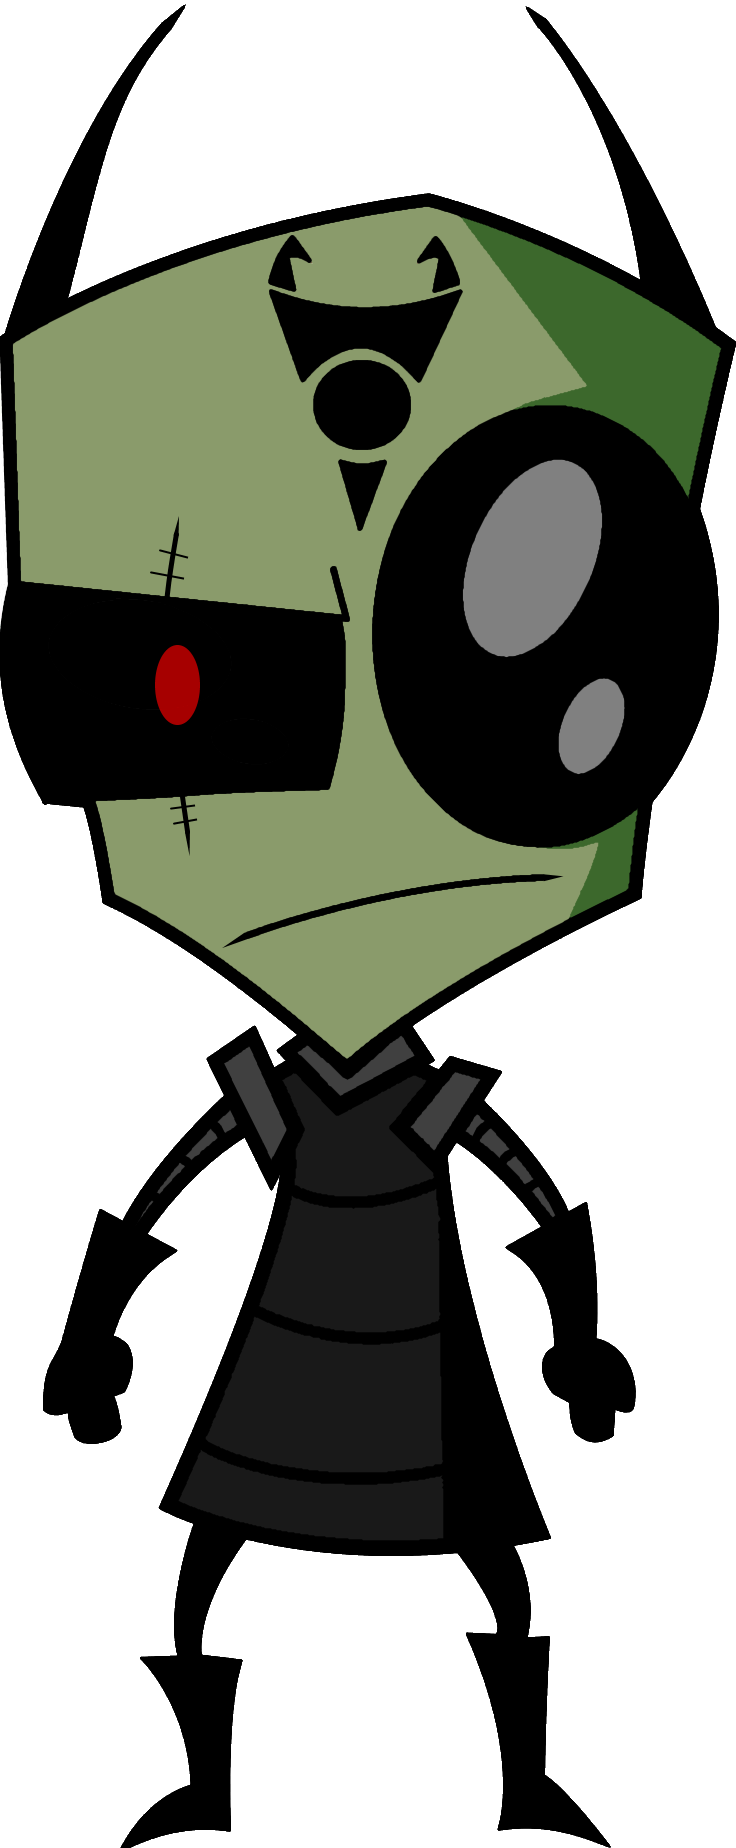 Krak By 6the6overlord6 - Zim From Invader Zim (736x1848)